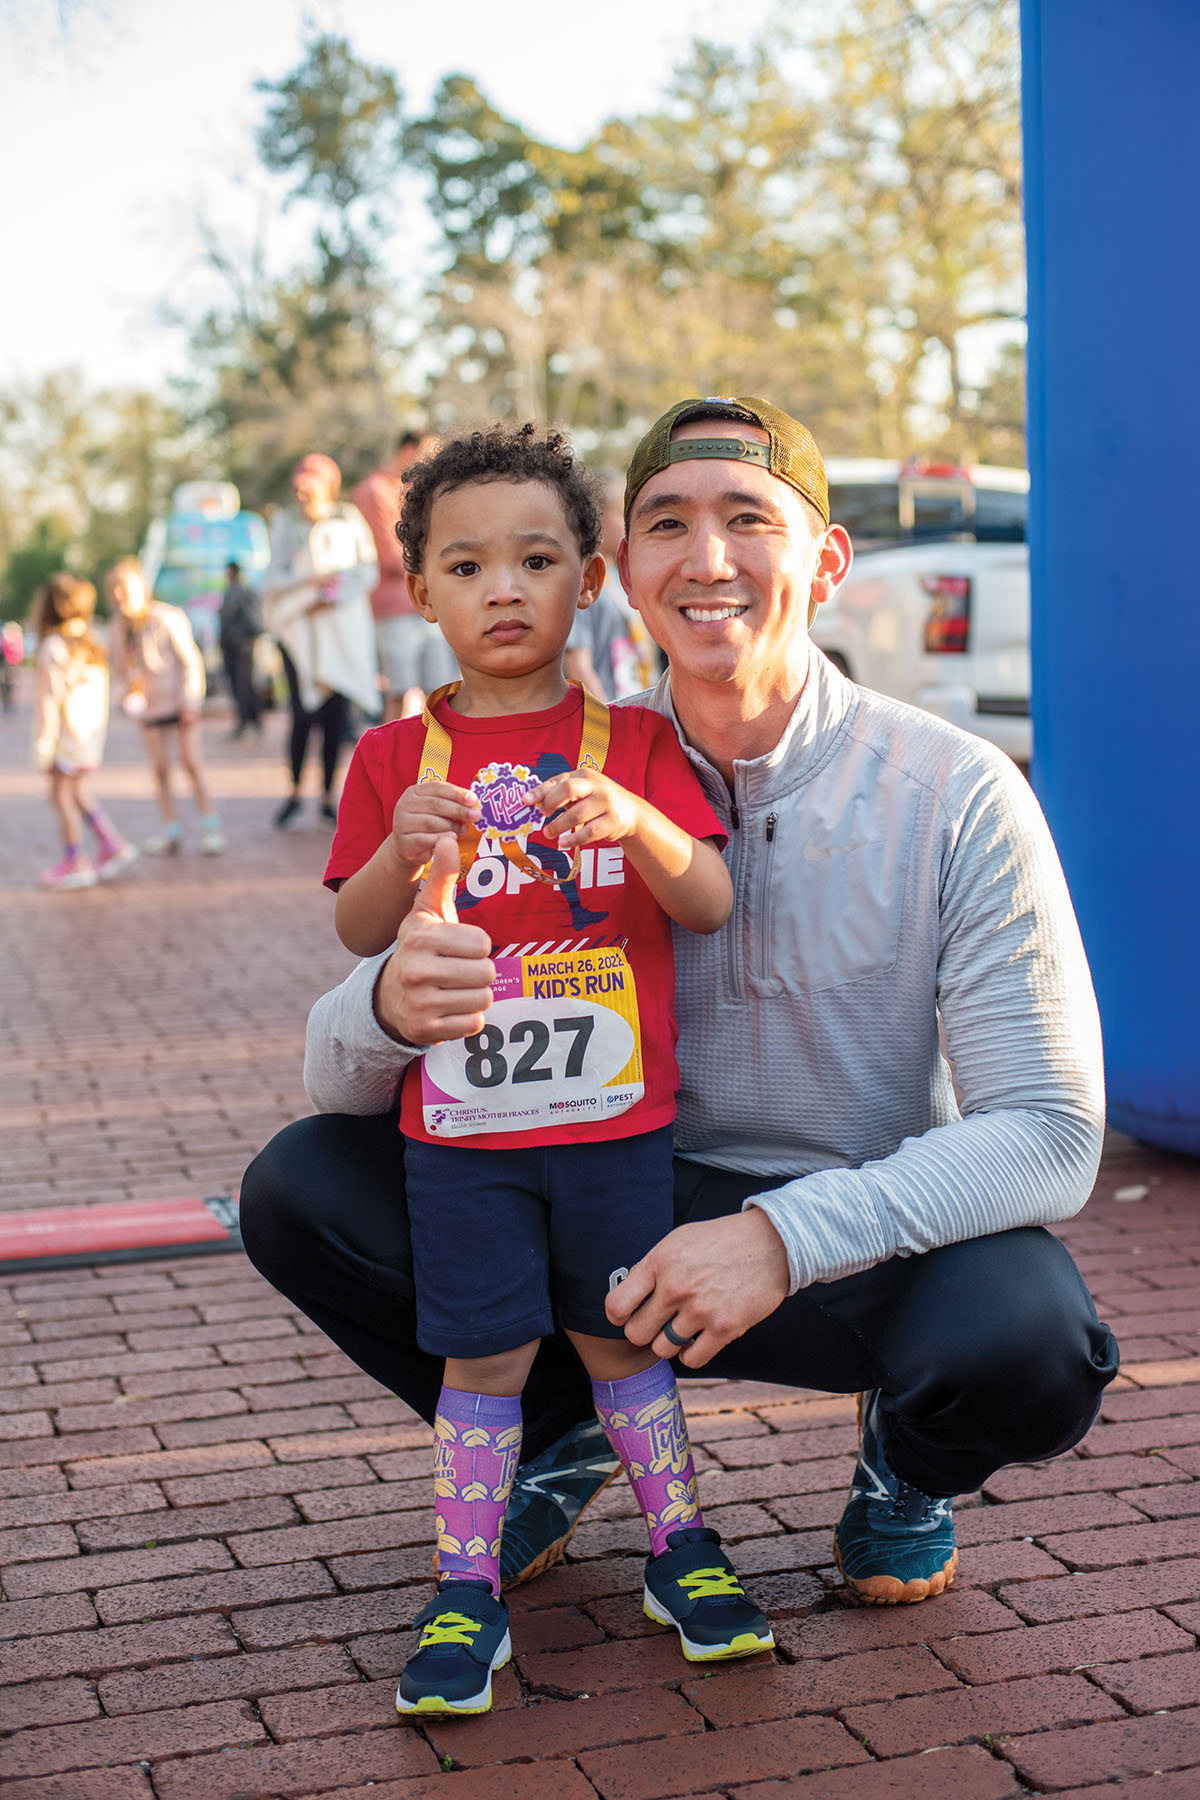 A man and child pose holding a race medal at a finish line